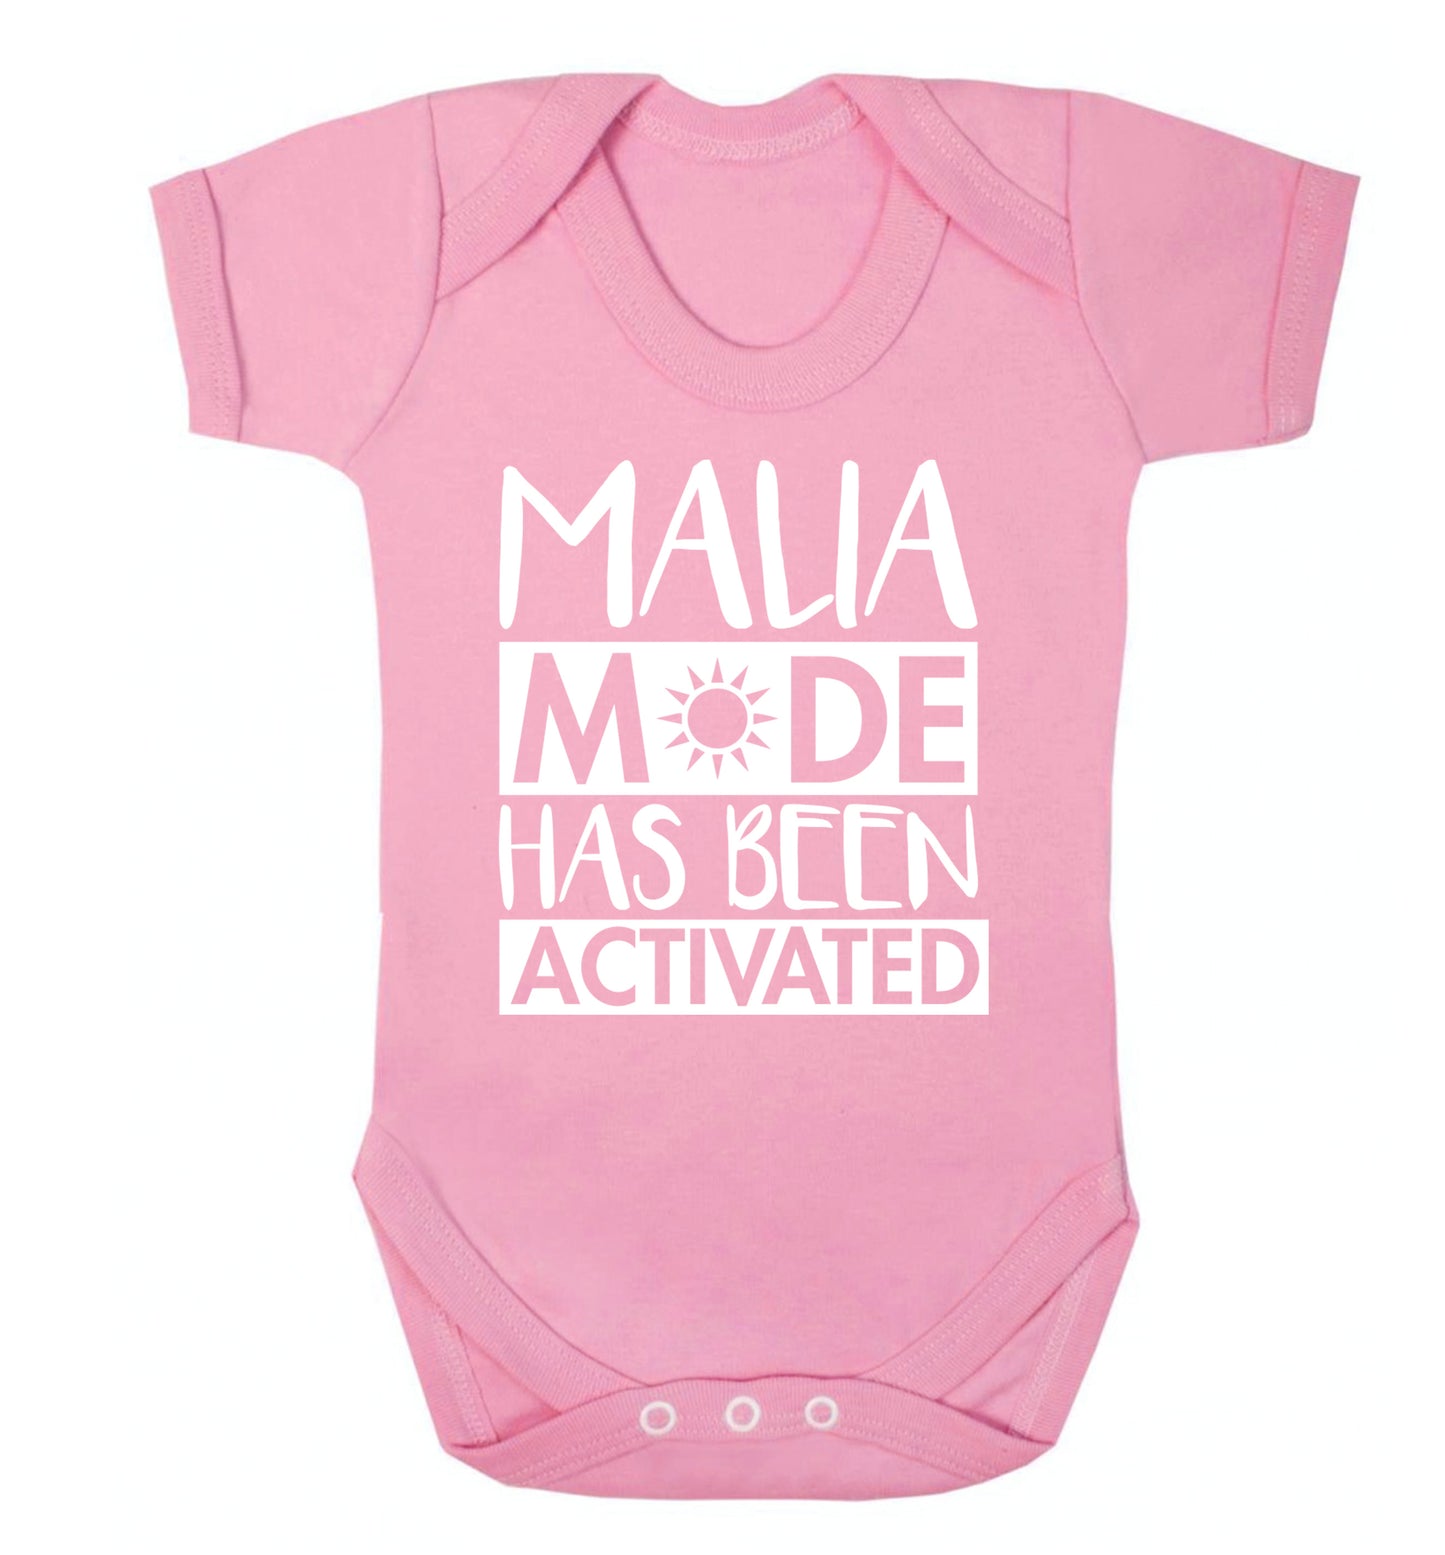 Malia mode has been activated Baby Vest pale pink 18-24 months